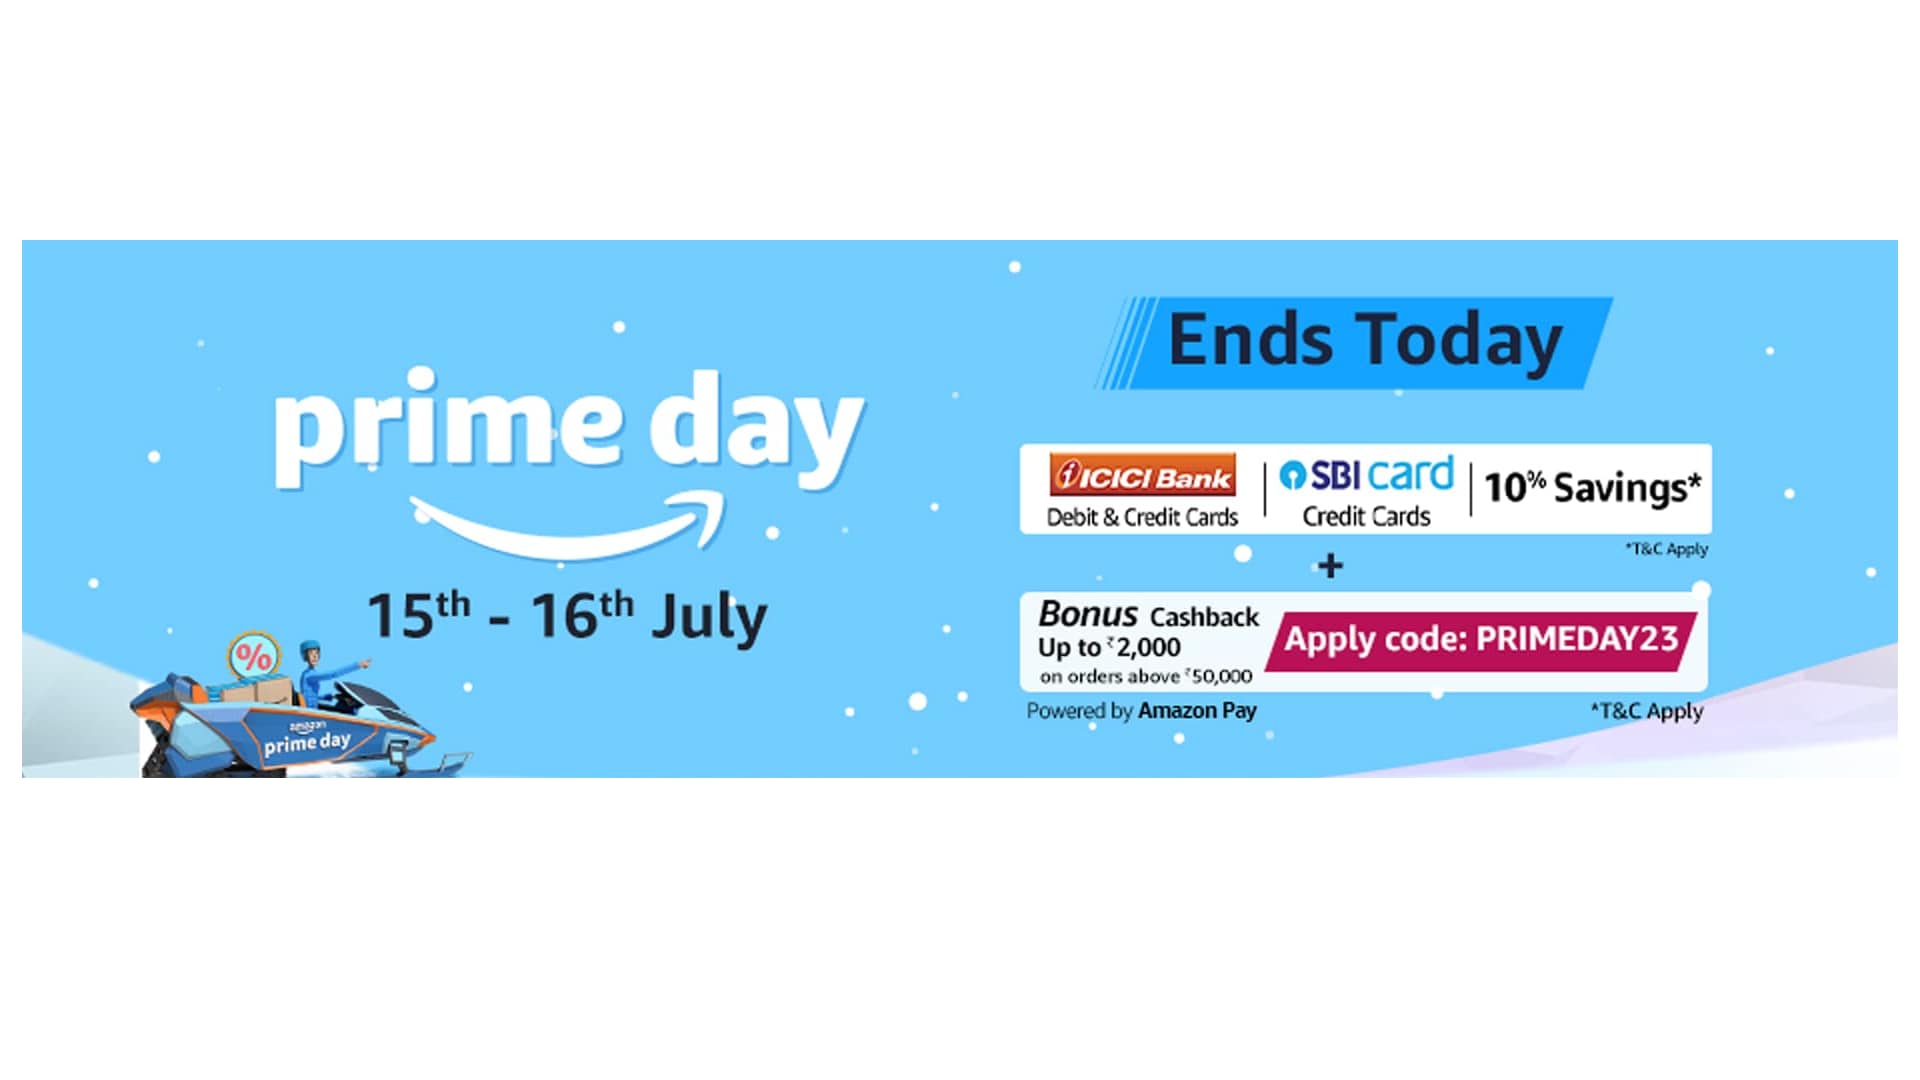 Amazon Prime Day launches Unbeatable Deals and Exciting Launches